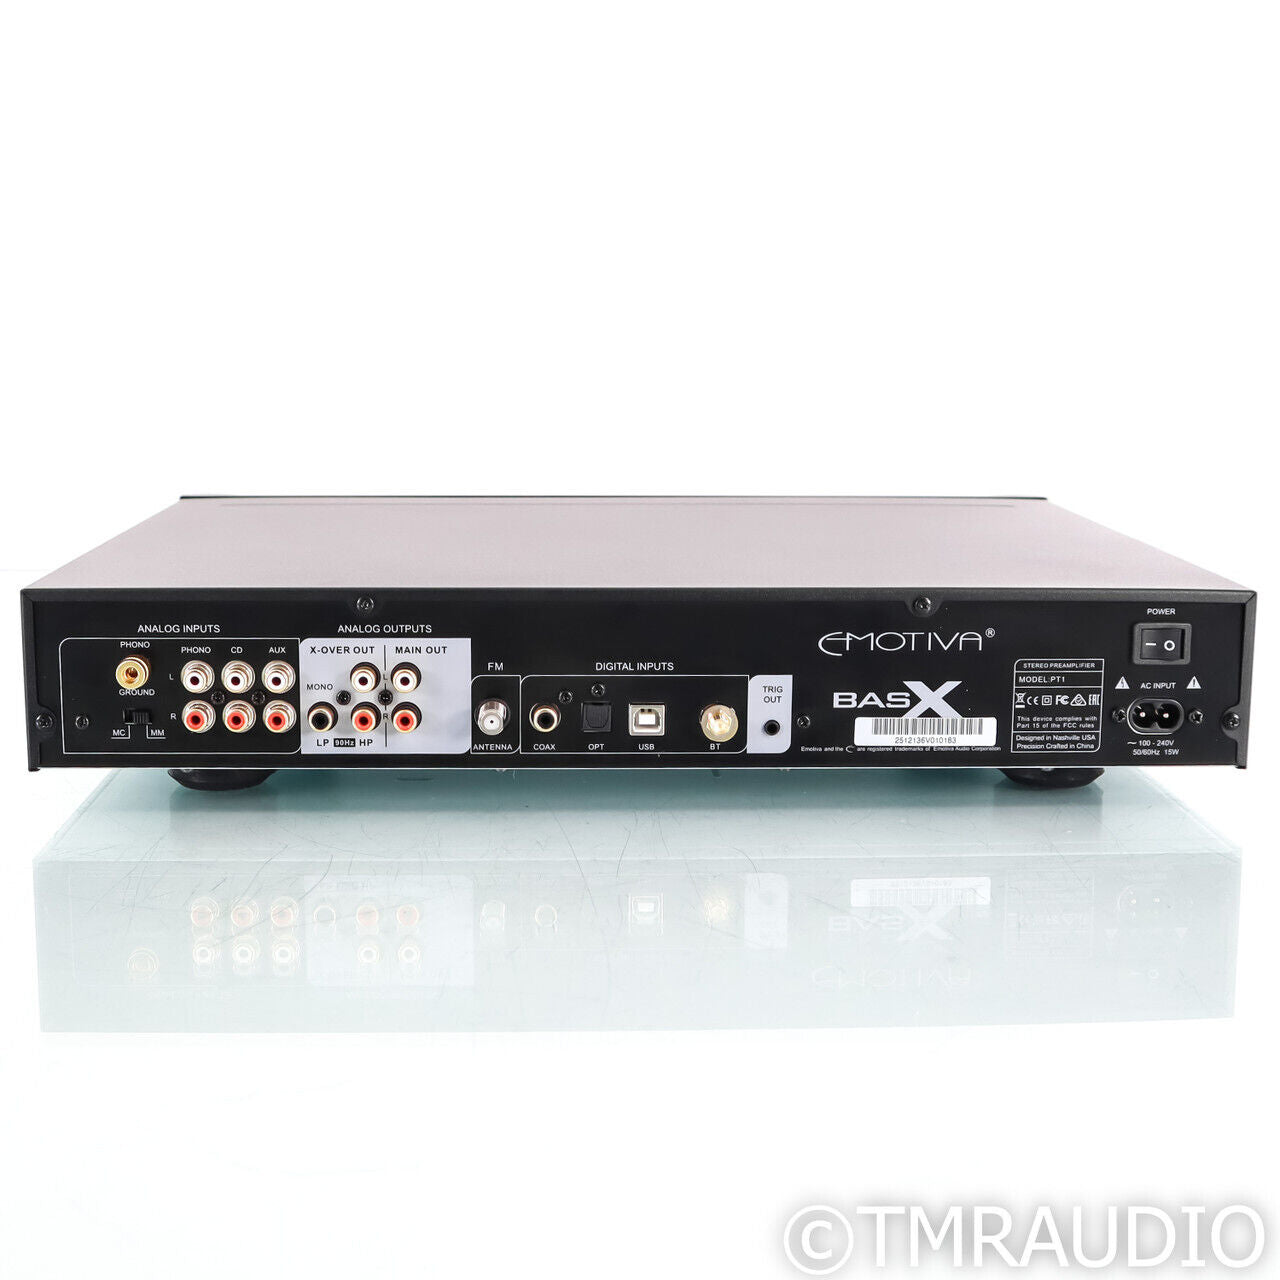 BasX PT1 Stereo Preamplifier/DAC/Tuner